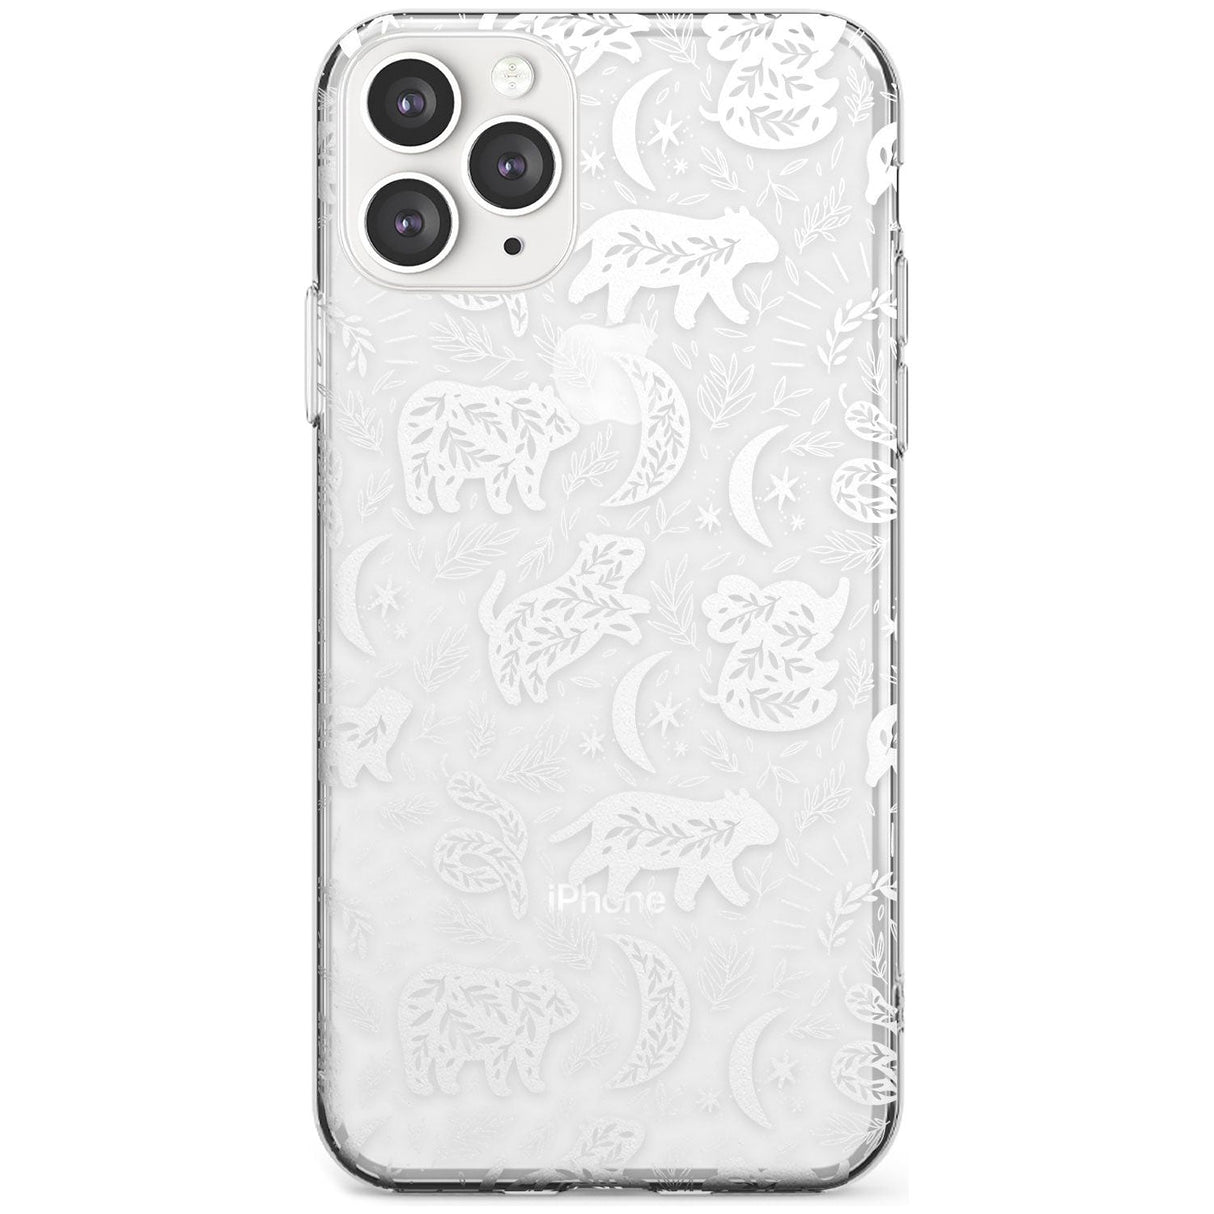 Forest Animal Silhouettes: White/Clear Phone Case iPhone 11 Pro Max / Clear Case,iPhone 11 Pro / Clear Case,iPhone 12 Pro Max / Clear Case,iPhone 12 Pro / Clear Case Blanc Space